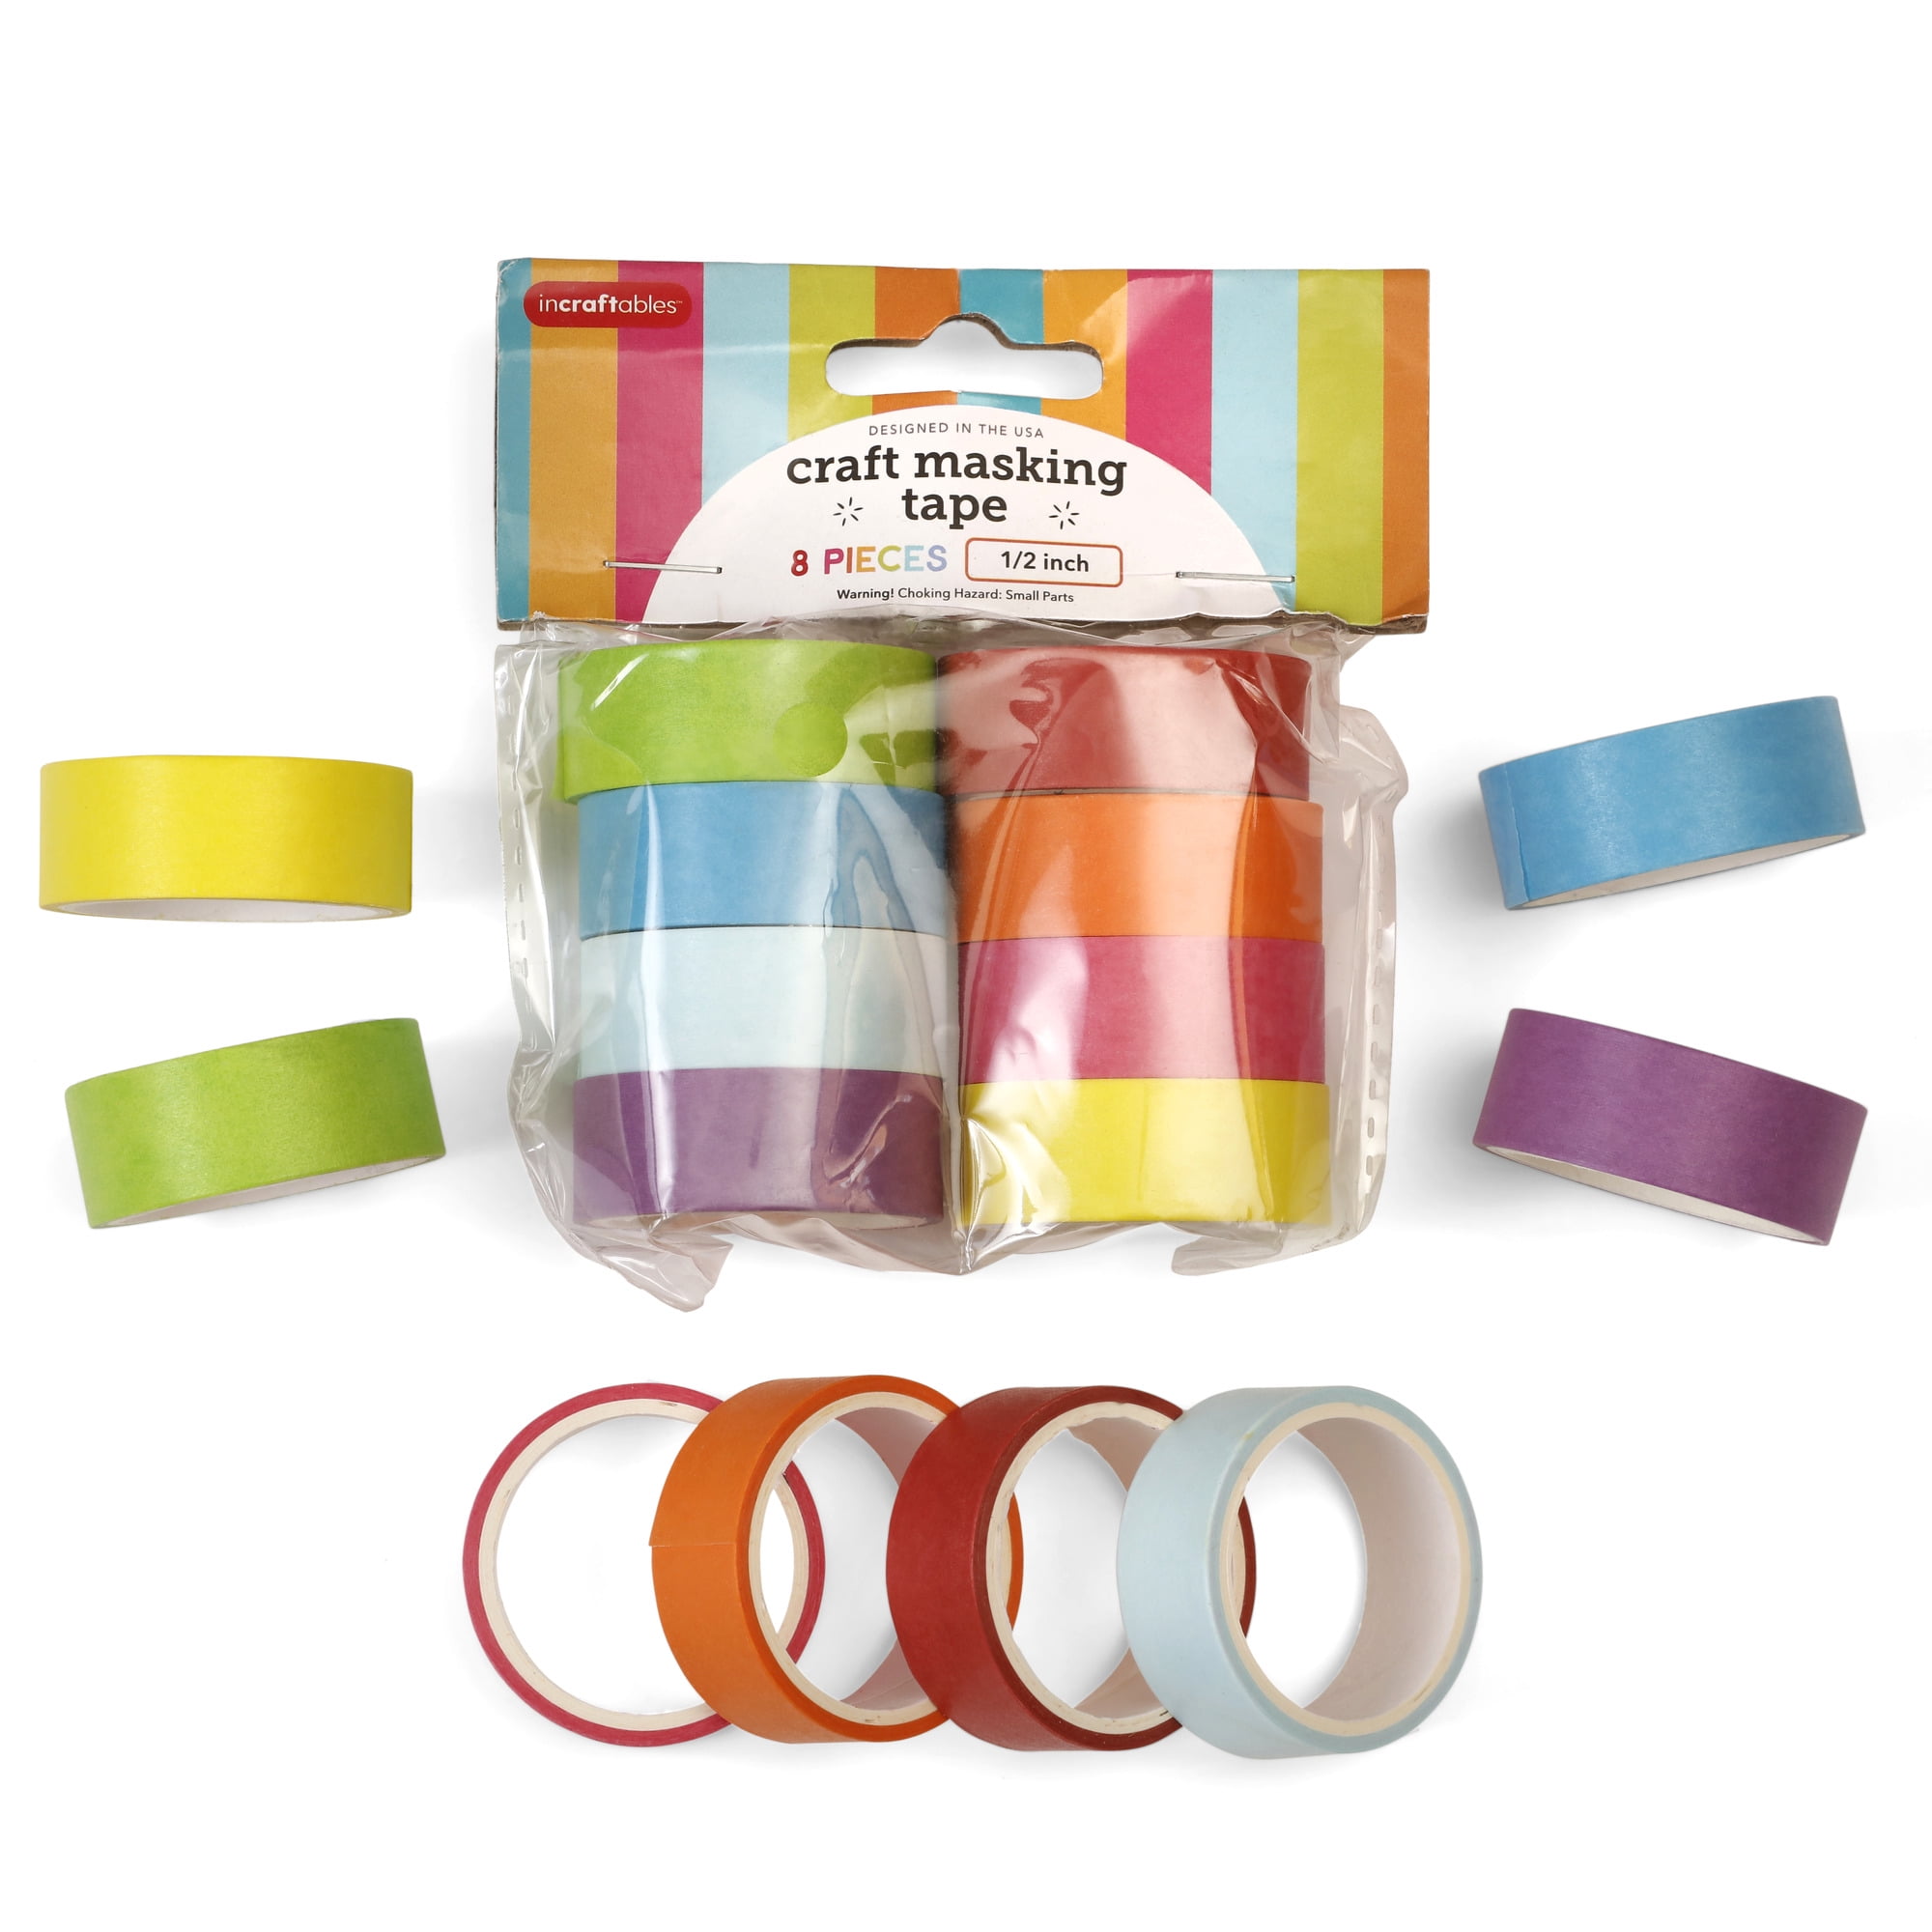  WOD MTC5 Colored Masking Tape, White, 1 inch x 60 yds. Colorful  Teacher Painters Tape for Fun DIY Art & Crafts, Lab Labeling, Writable &  Classroom Decorations : Tools & Home Improvement